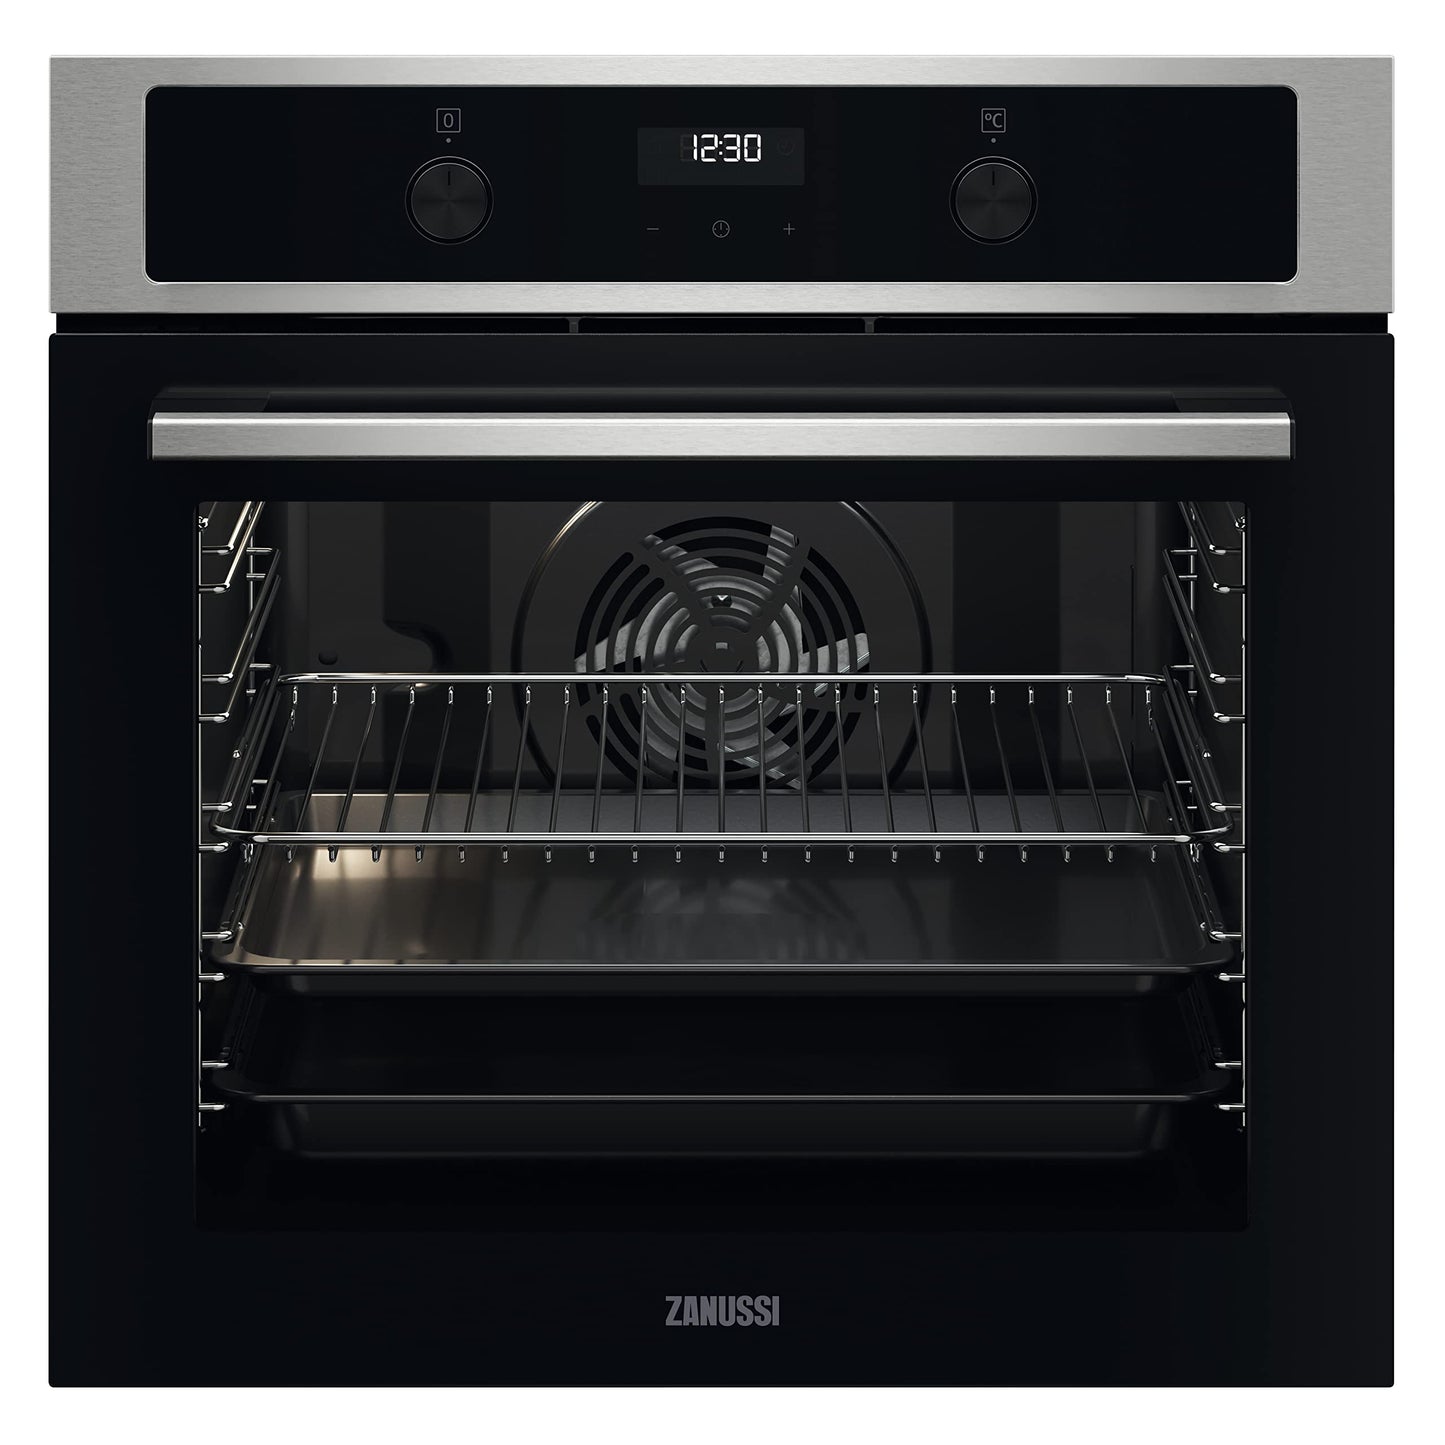 Zanussi 60 cm Built in Electric Oven with Steam, 75 Litre Capacity, 1 Year Warranty, ZOHKD4X1A